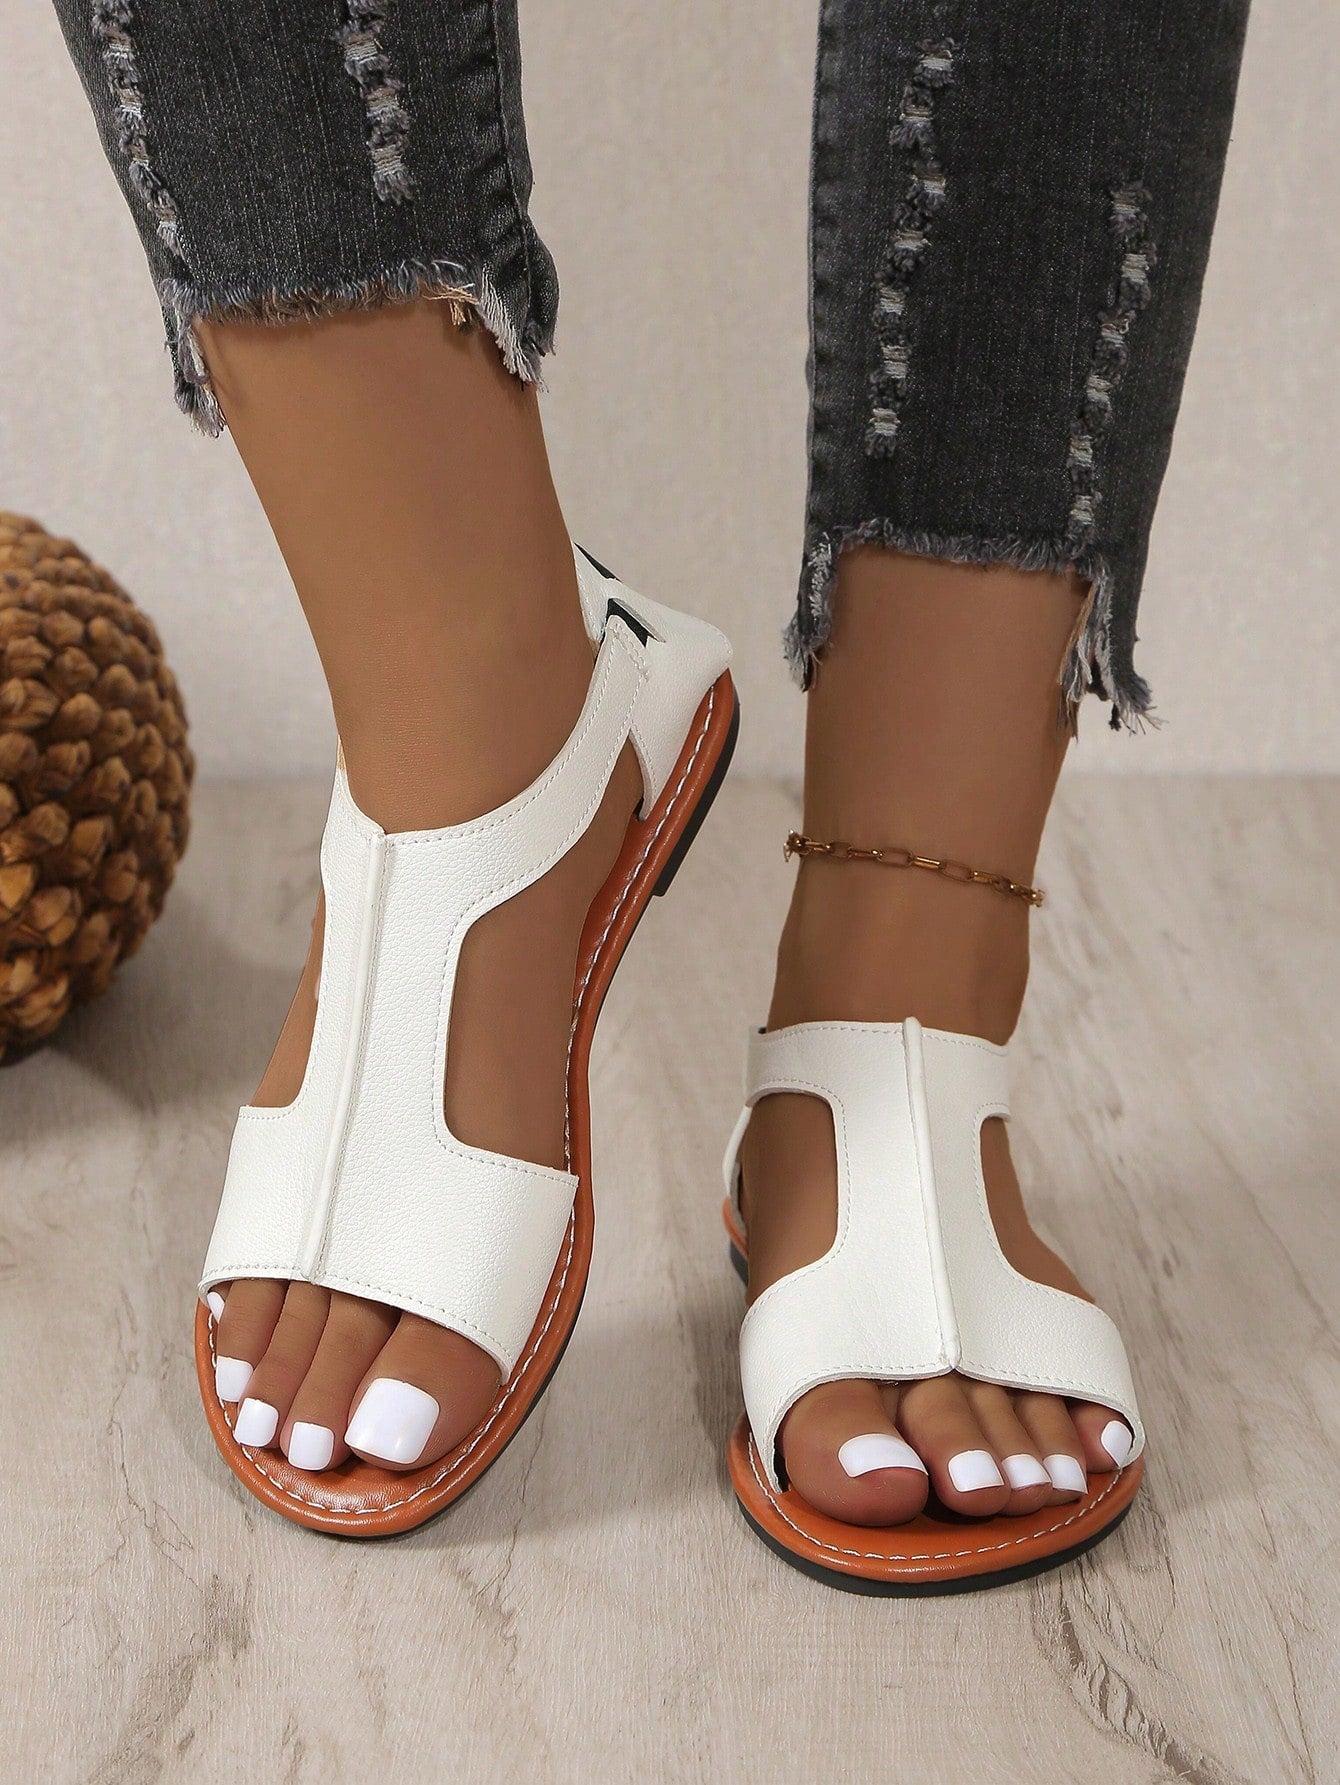 New Women Casual Comfortable Slip-On Flat Sandals With College Style Made Of Leather, Ideal For Beach Party And Music Festival-White-4